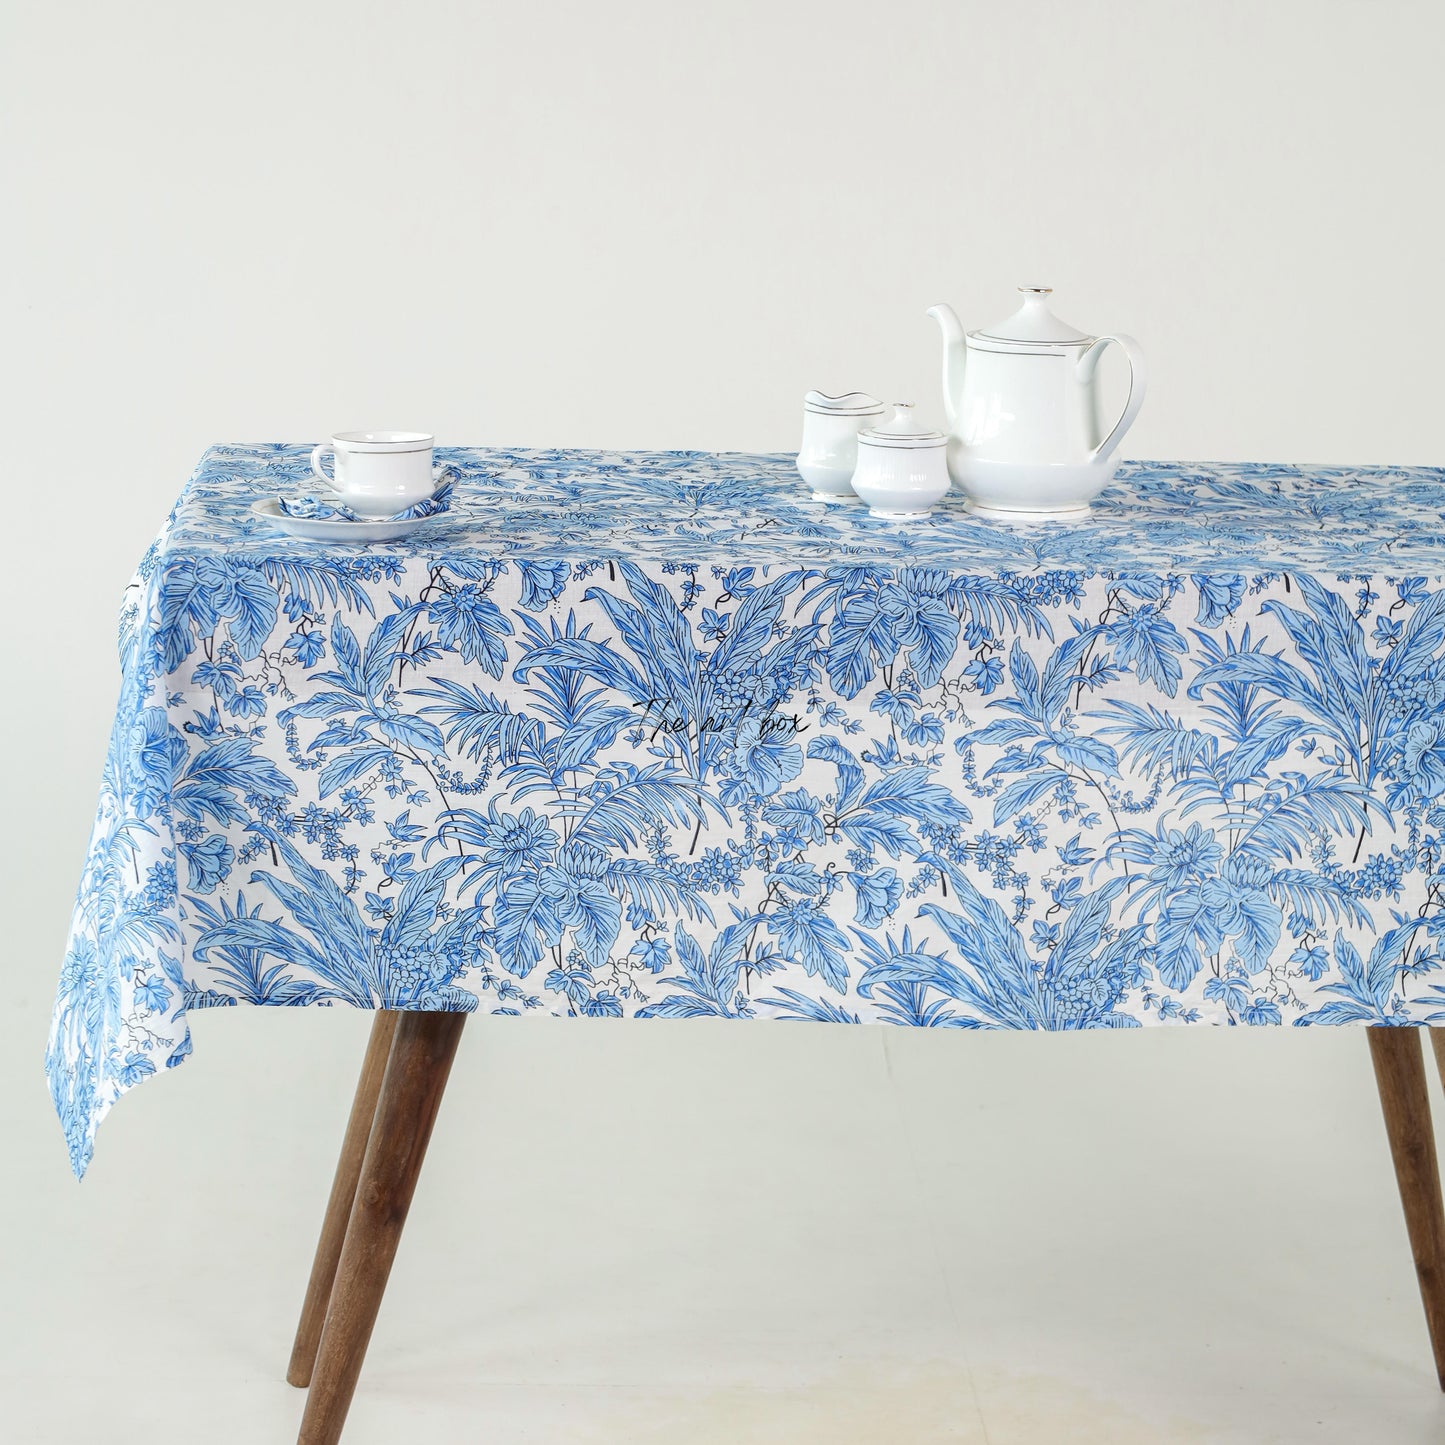 Sky Blue Tablecloth Floral Printed Cotton Table Cover